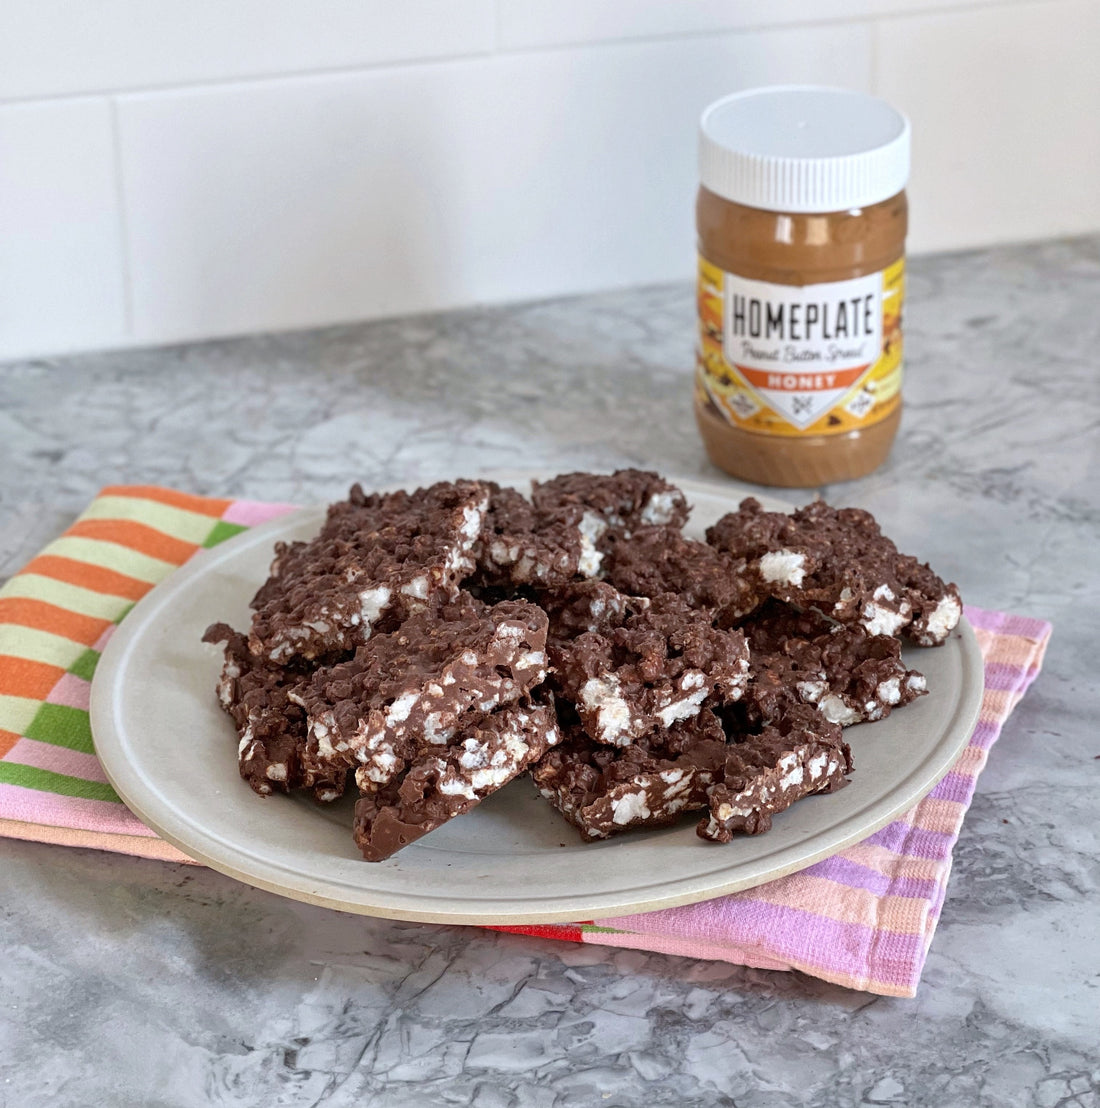 HomePlate Honey Peanut Butter Chocolate Crunch Bars made with rice cakes.